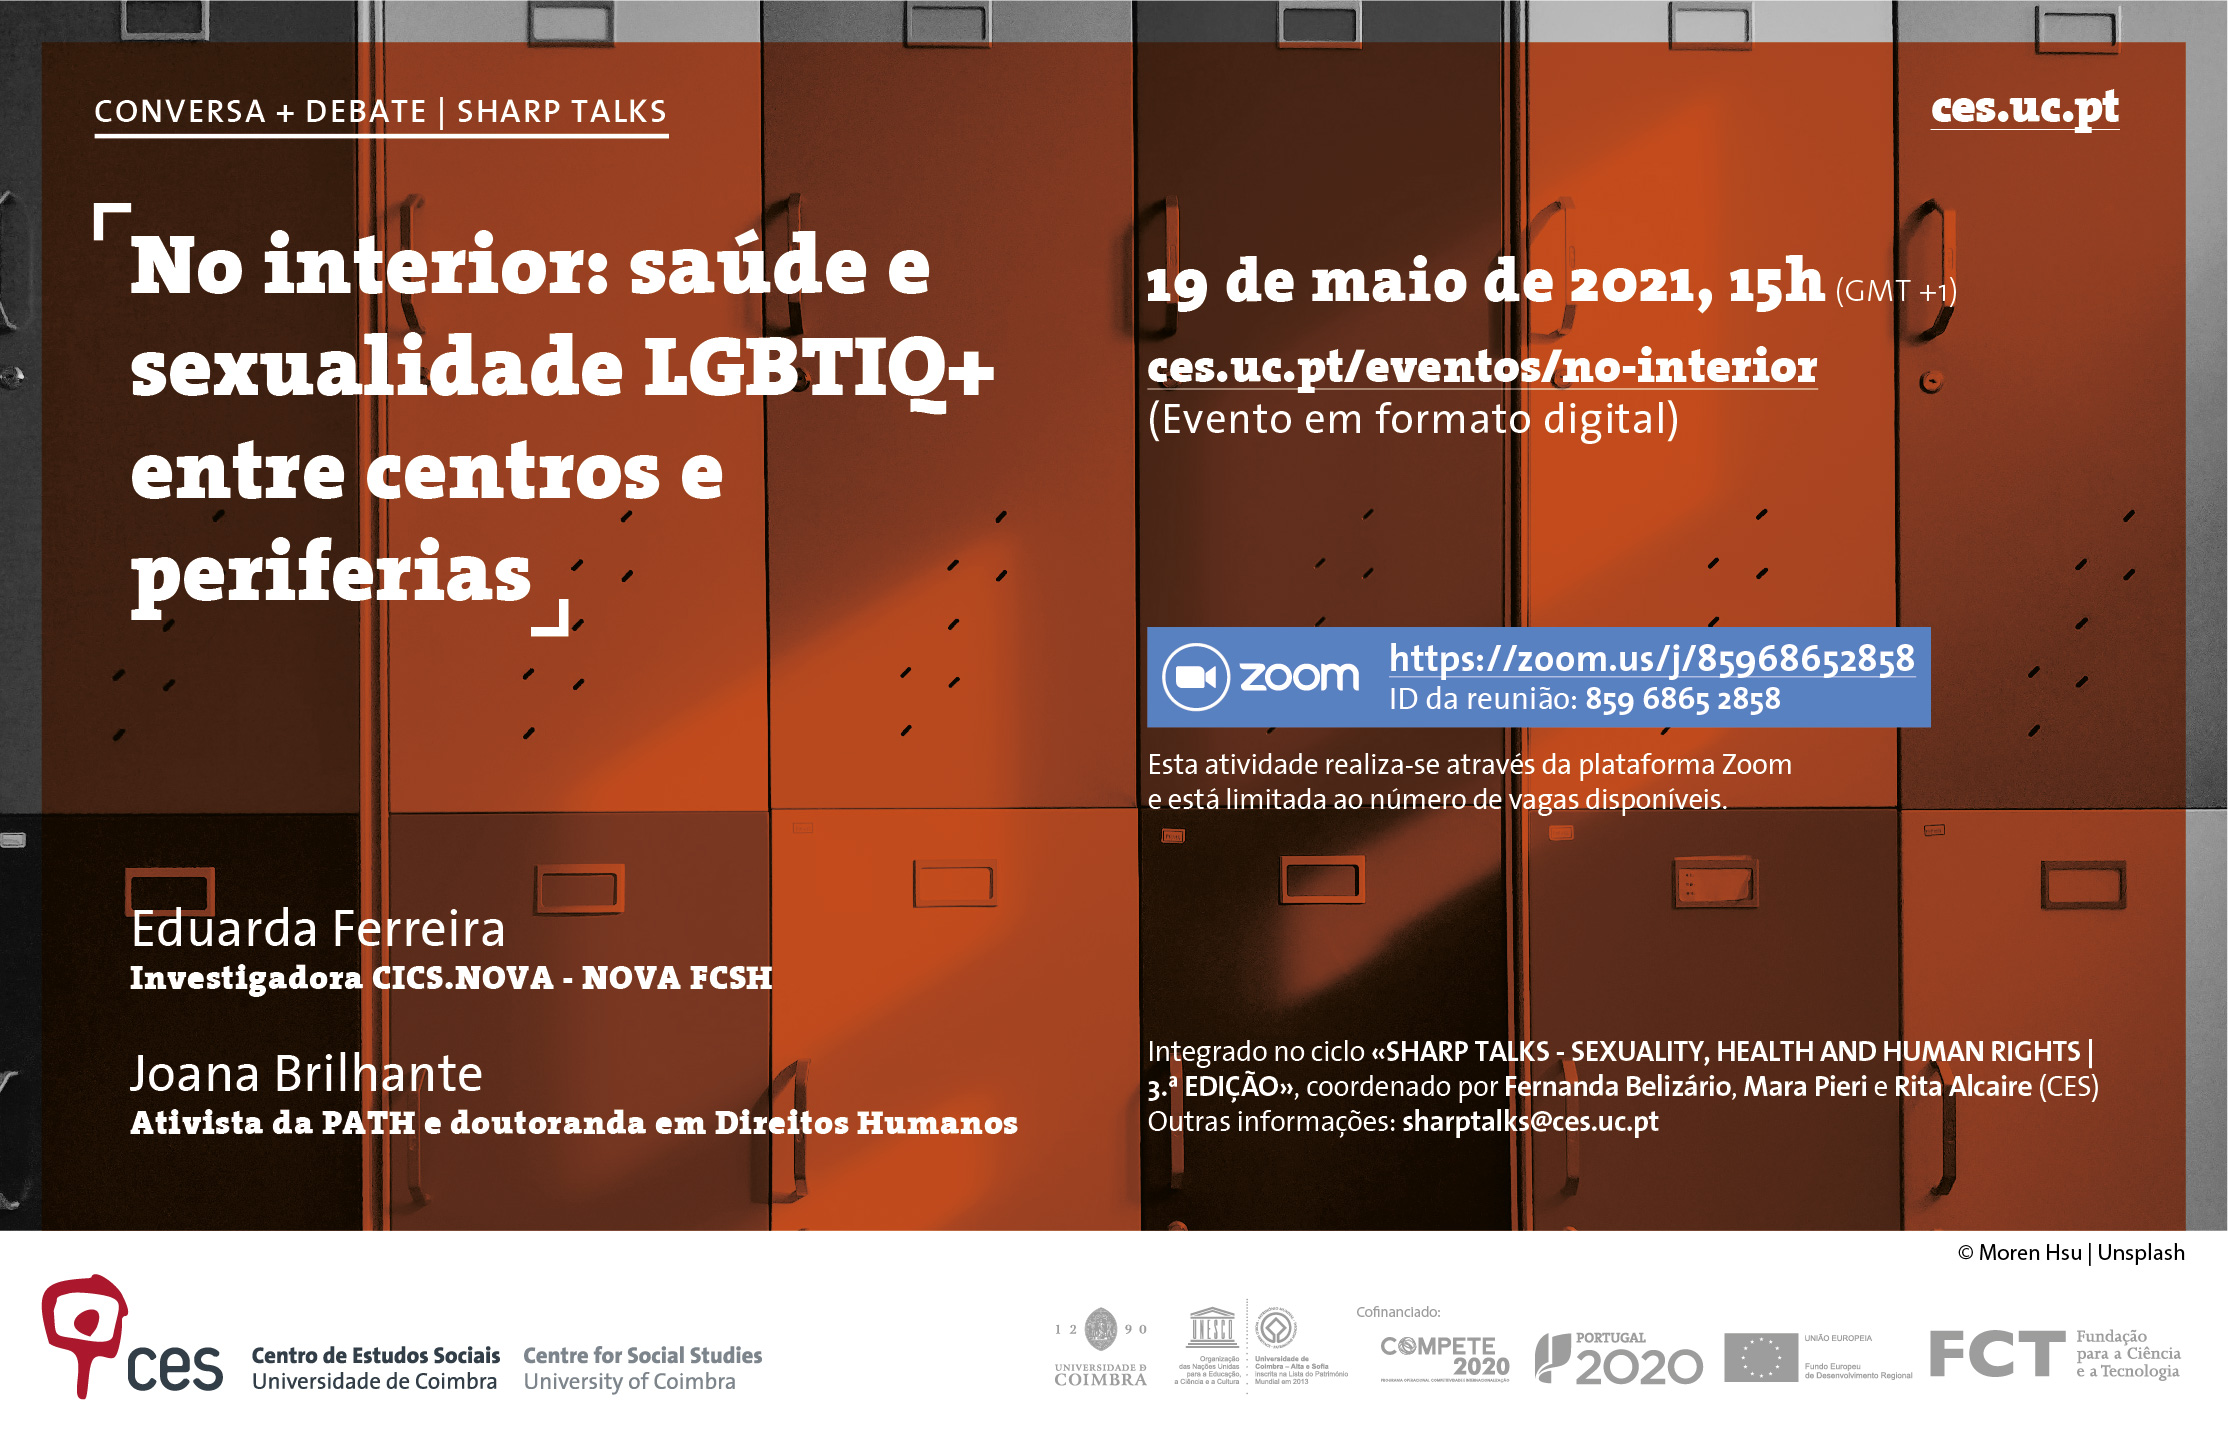 Into the interior: LGBTIQ+ health and sexuality between centres and peripheries<span id="edit_34067"><script>$(function() { $('#edit_34067').load( "/myces/user/editobj.php?tipo=evento&id=34067" ); });</script></span>